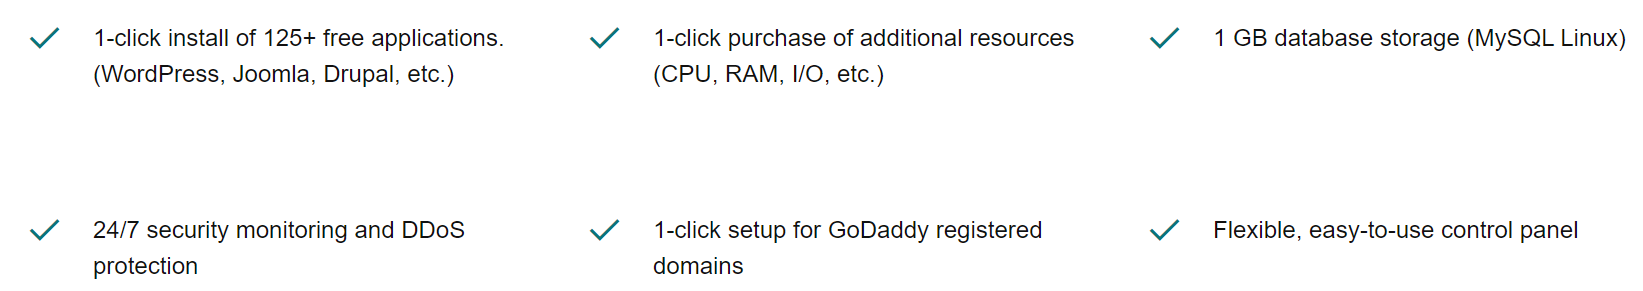 Godaddy shared hosting plans features